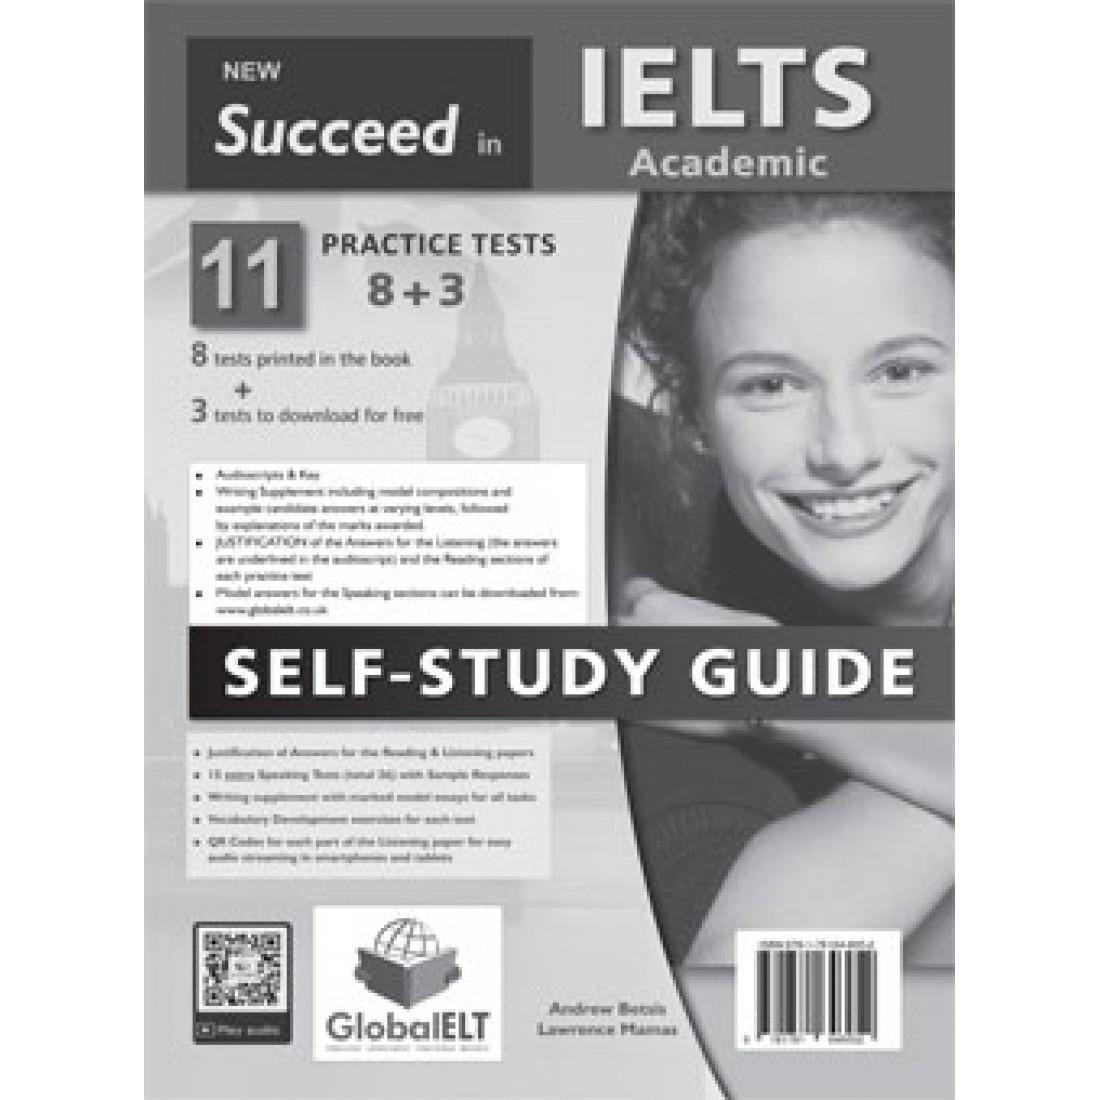 NEW SUCCEED IN IELTS ACADEMIC 11(8+3) PRACTICE TESTS SELF-STUDY